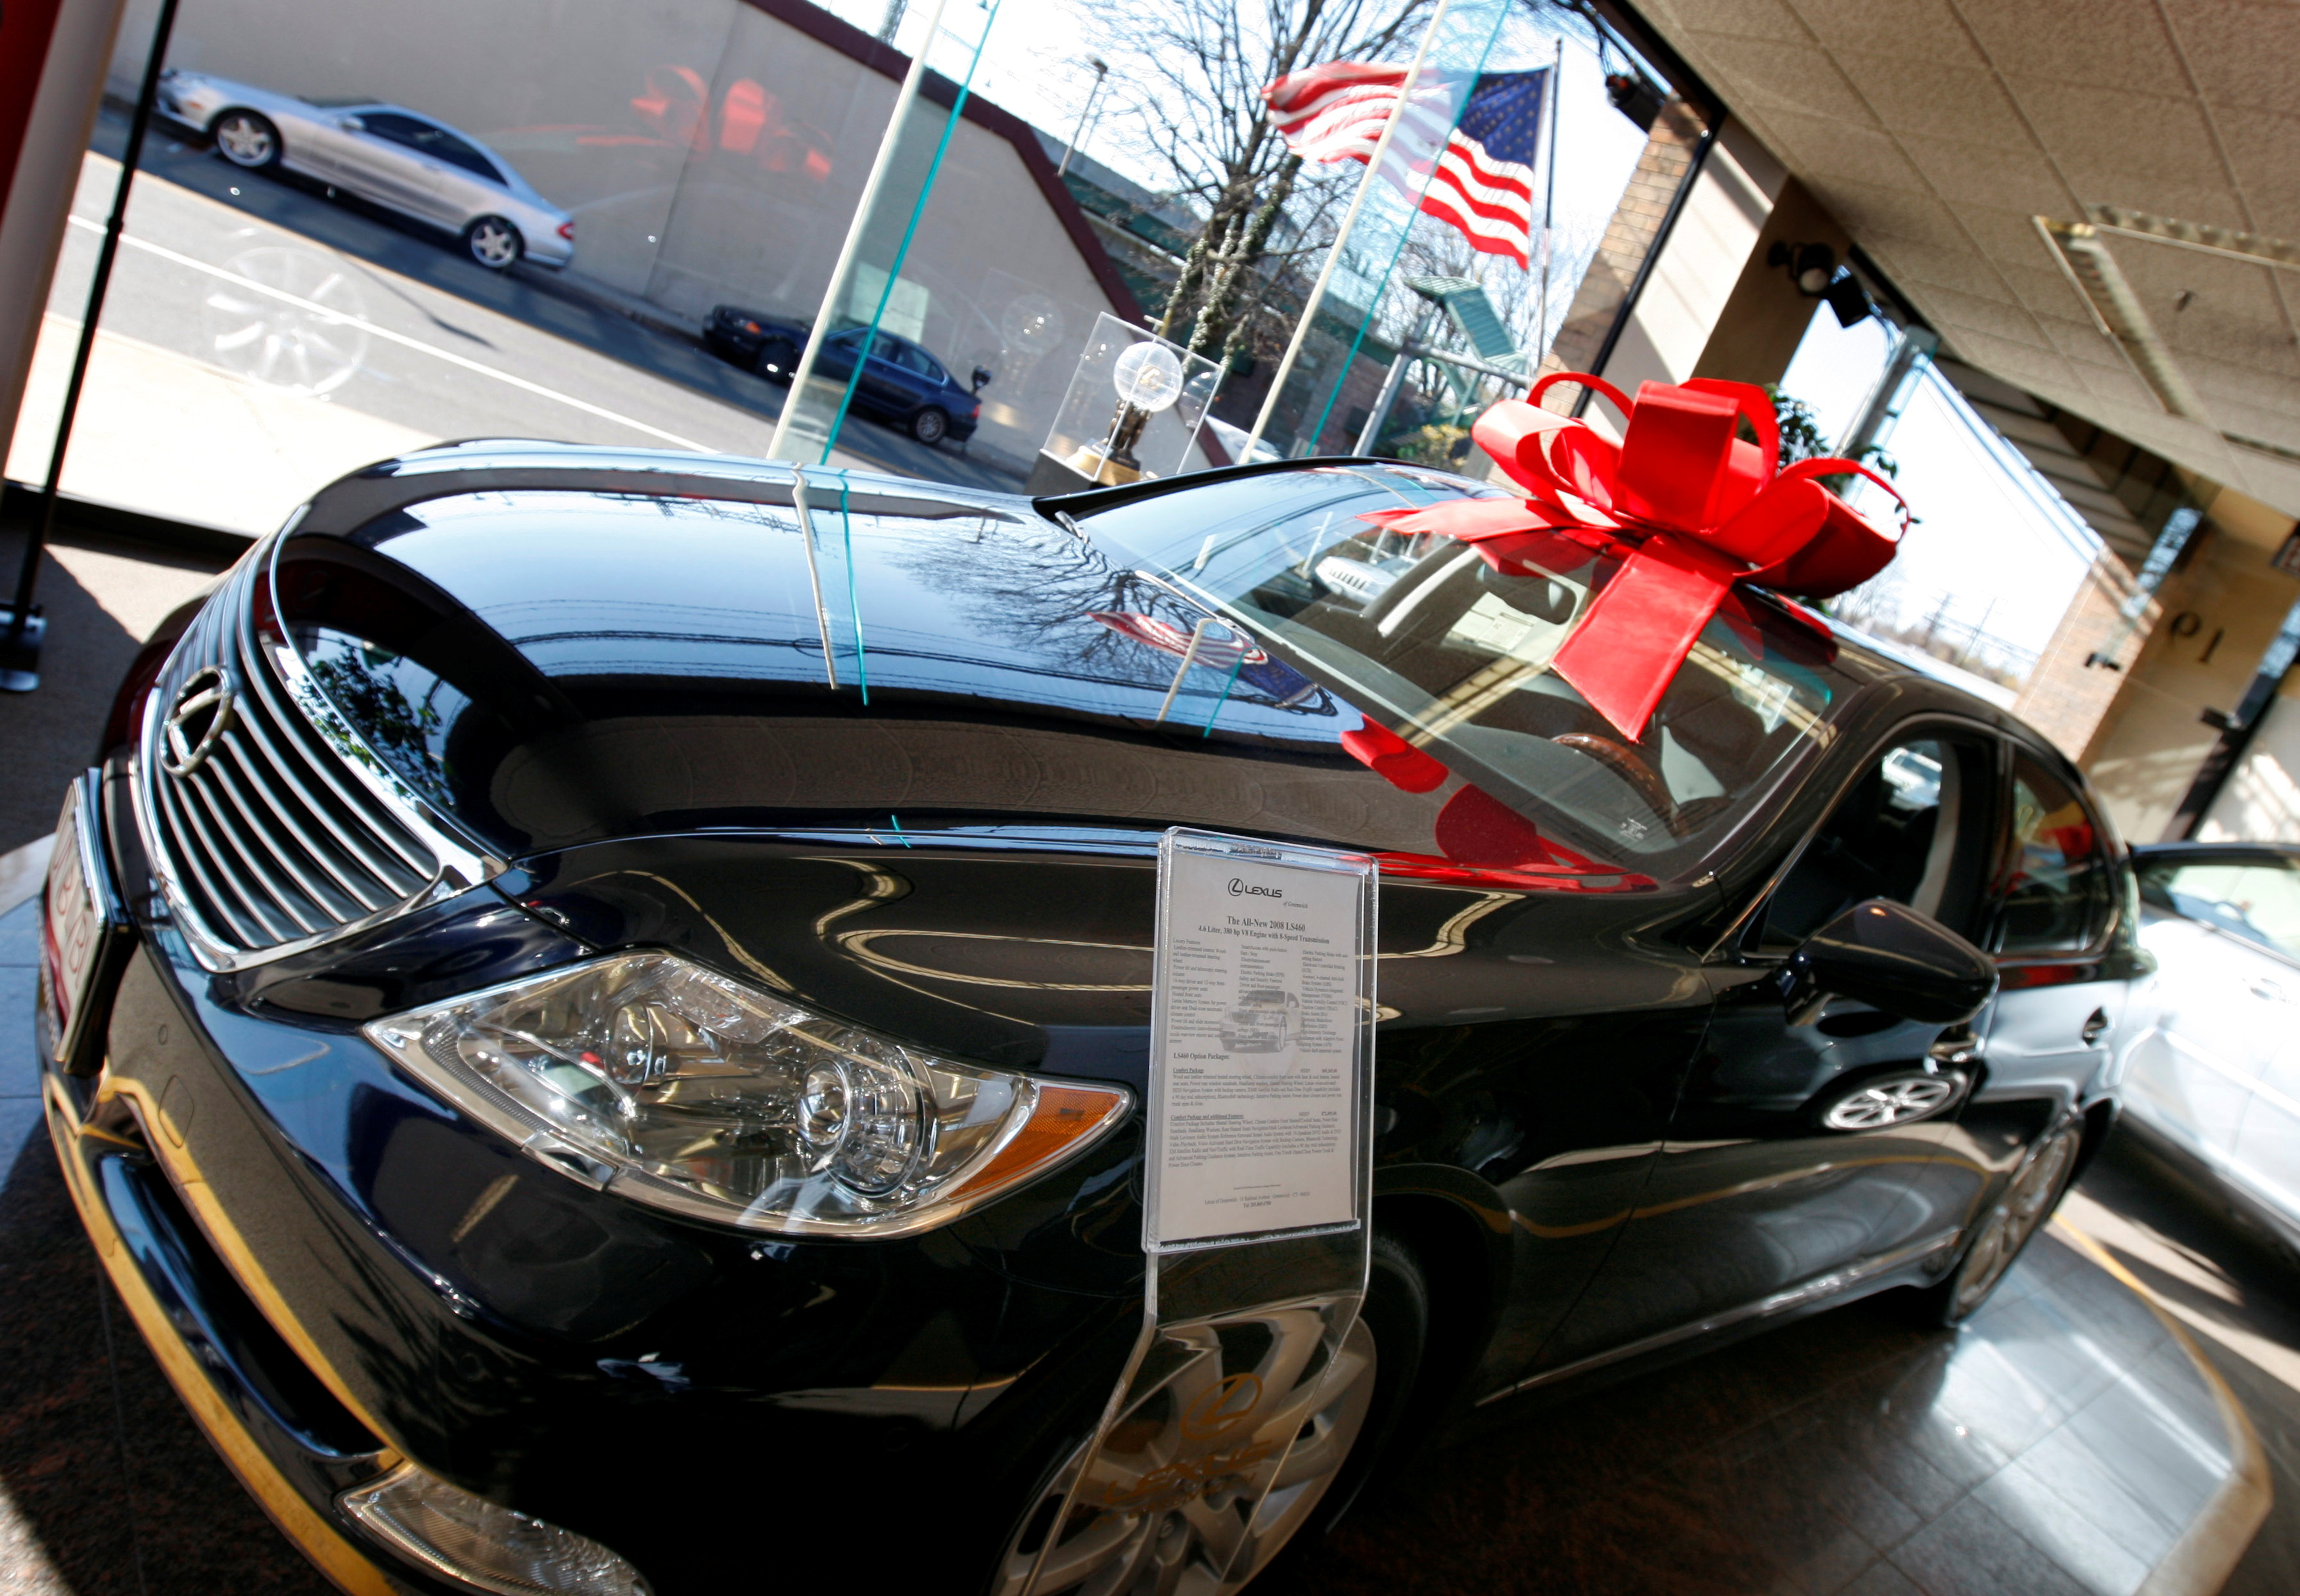 Cars sit for sale in a Lexus dealership in Greenwich, Connecticut, November 17, 2008. REUTERS/Mike Segar   (UNITED STATES)/File Photo